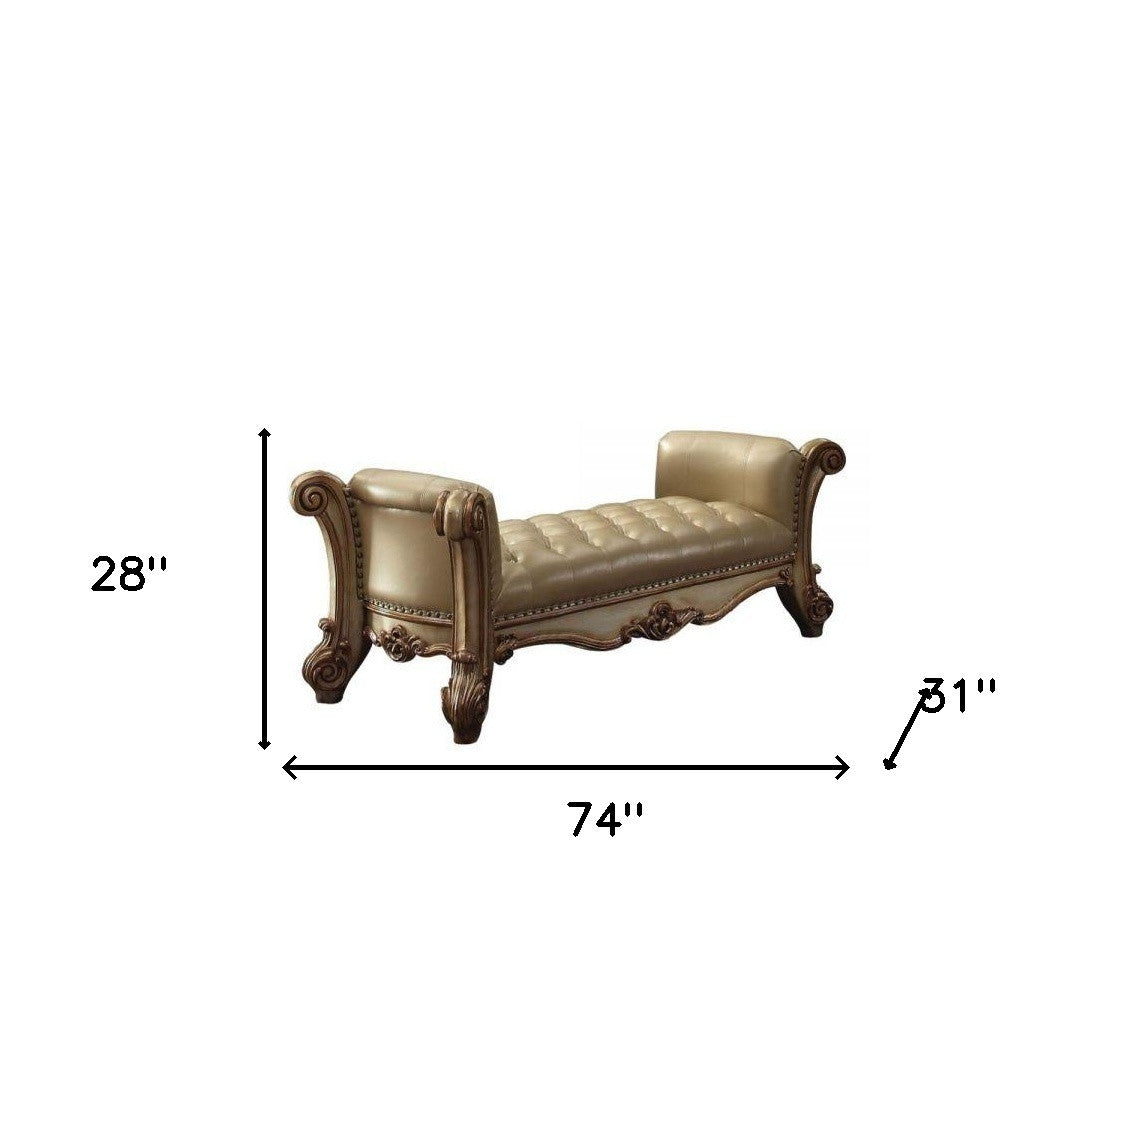 74" Beige and Gold Upholstered Faux Leather Bench